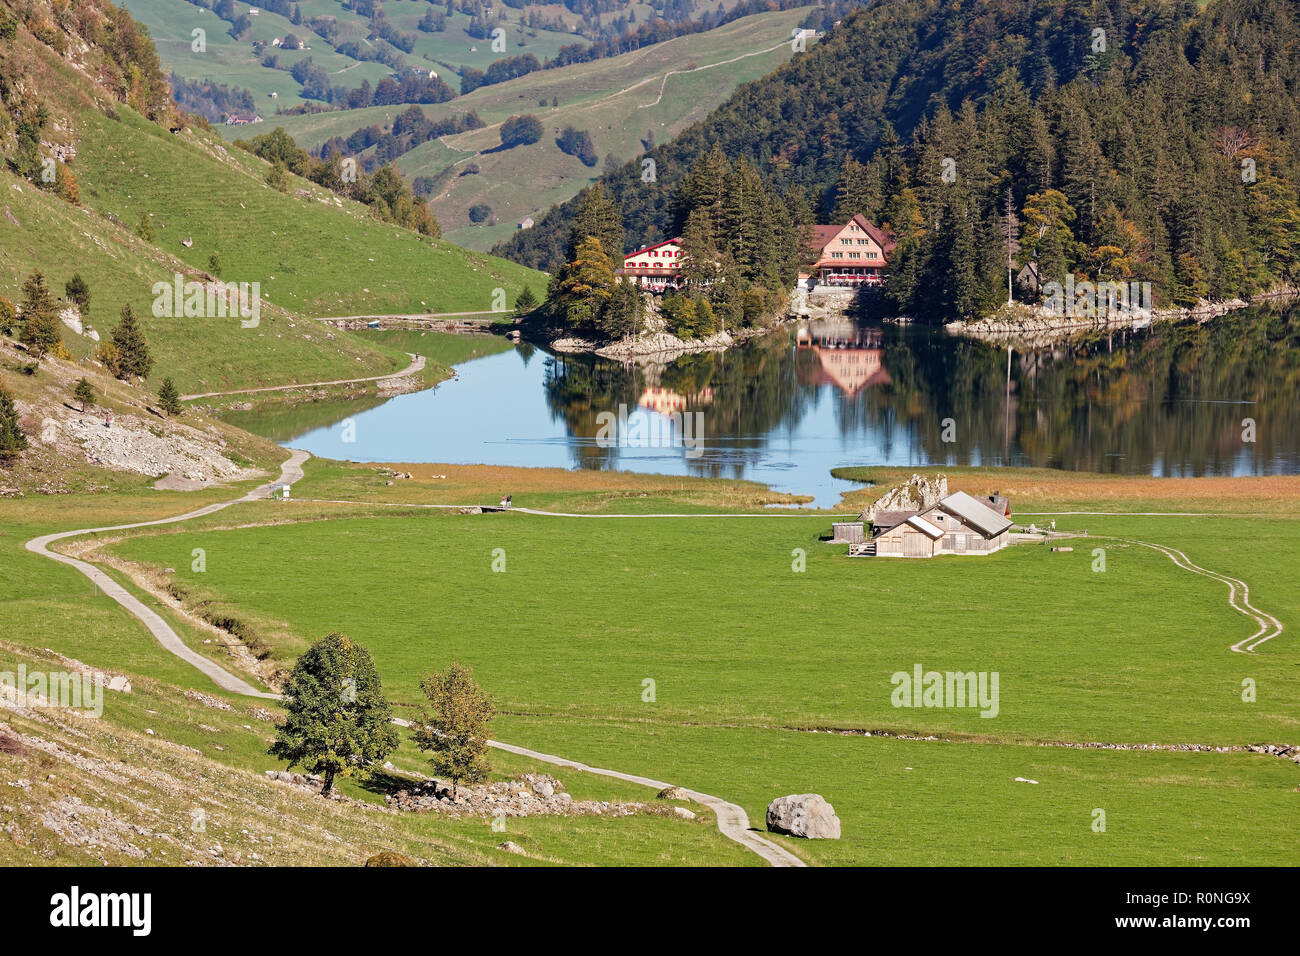 Sunny views of pastures, Seealpsee Inn, Forelle Inn from Oberstofel by Seealpsee lake in Alpstein, Appenzell Alps, Switzerland Stock Photo